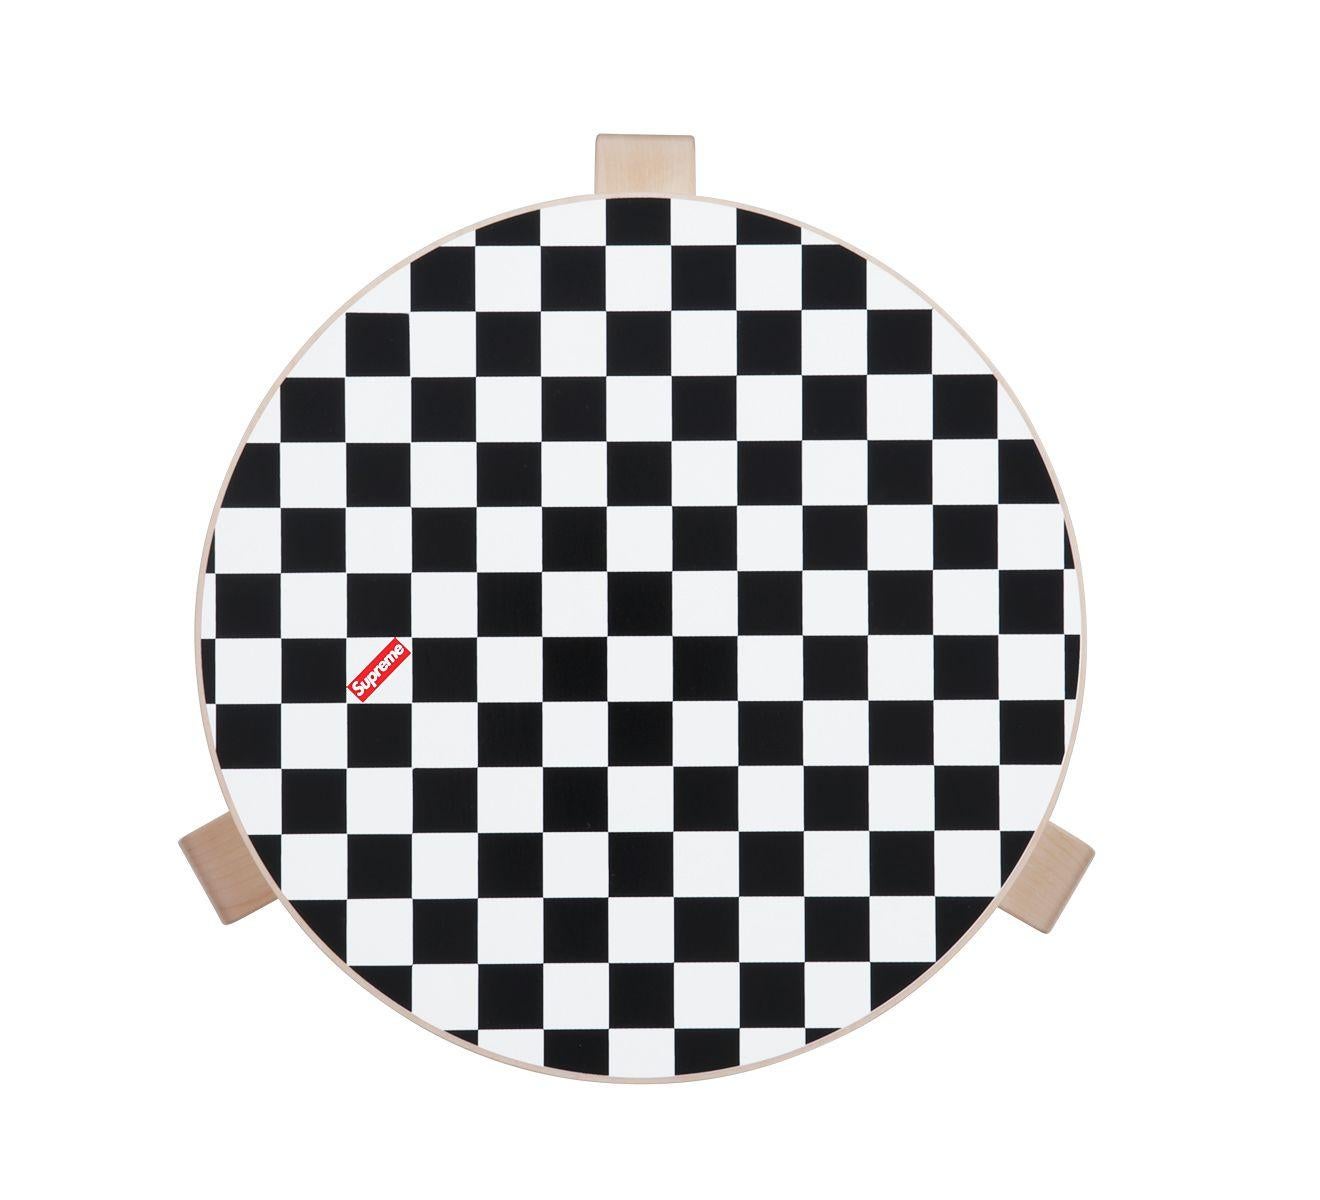 Supreme x Artek

Artek has joined forces with cult brand Supreme to develop collaborative product: Alvar Aalto’s Stool 60, with a Supreme-designed checker pattern, manually applied by silk screen printing.

The Stool was limited edition in 2017